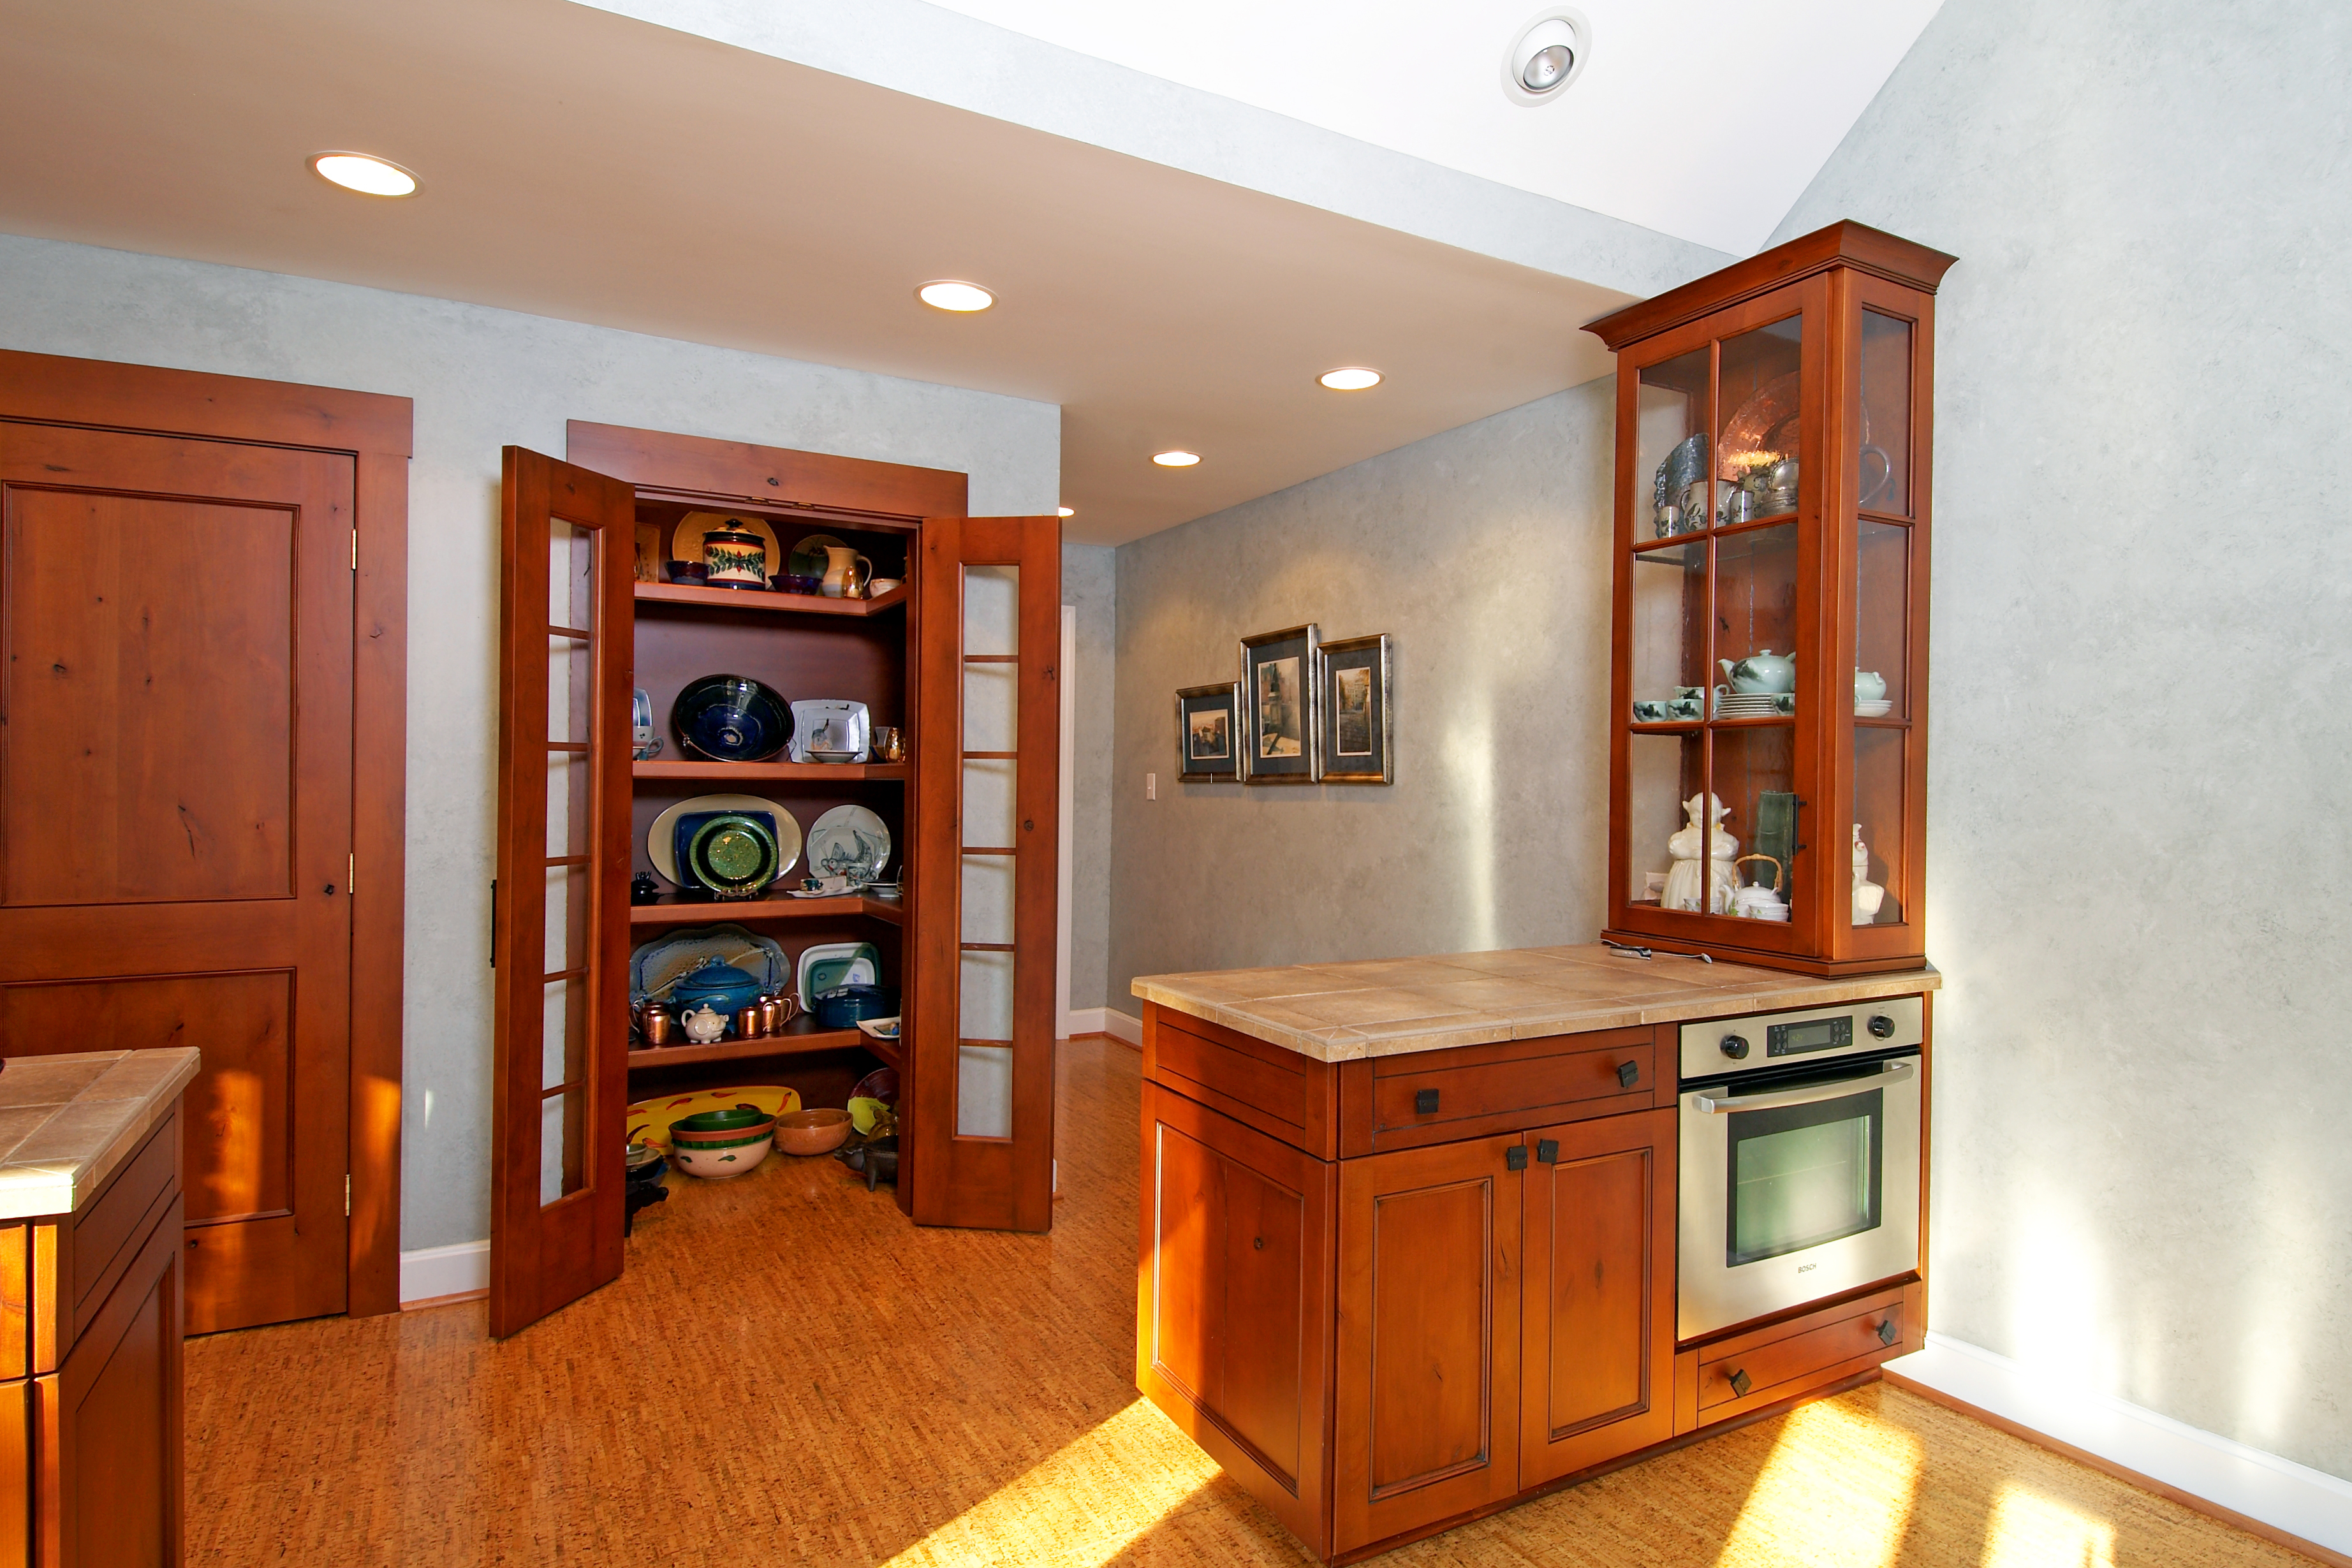 Custom cabinetry was made to allow for the homeowners collections